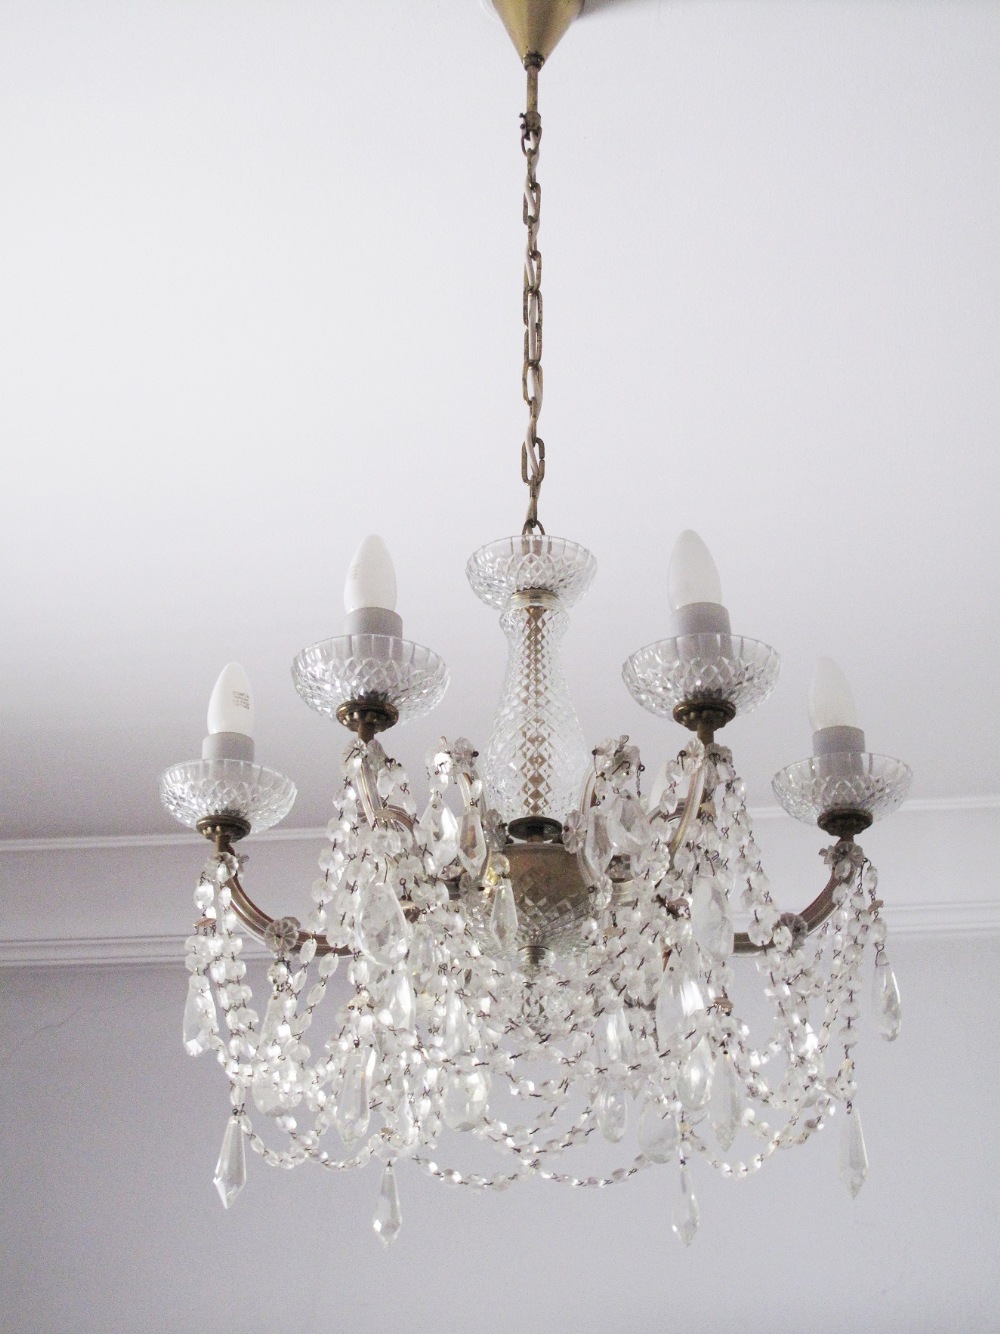 Georgian style six branch chandelier with facet cut crystal drops. The lamp shades are not included.